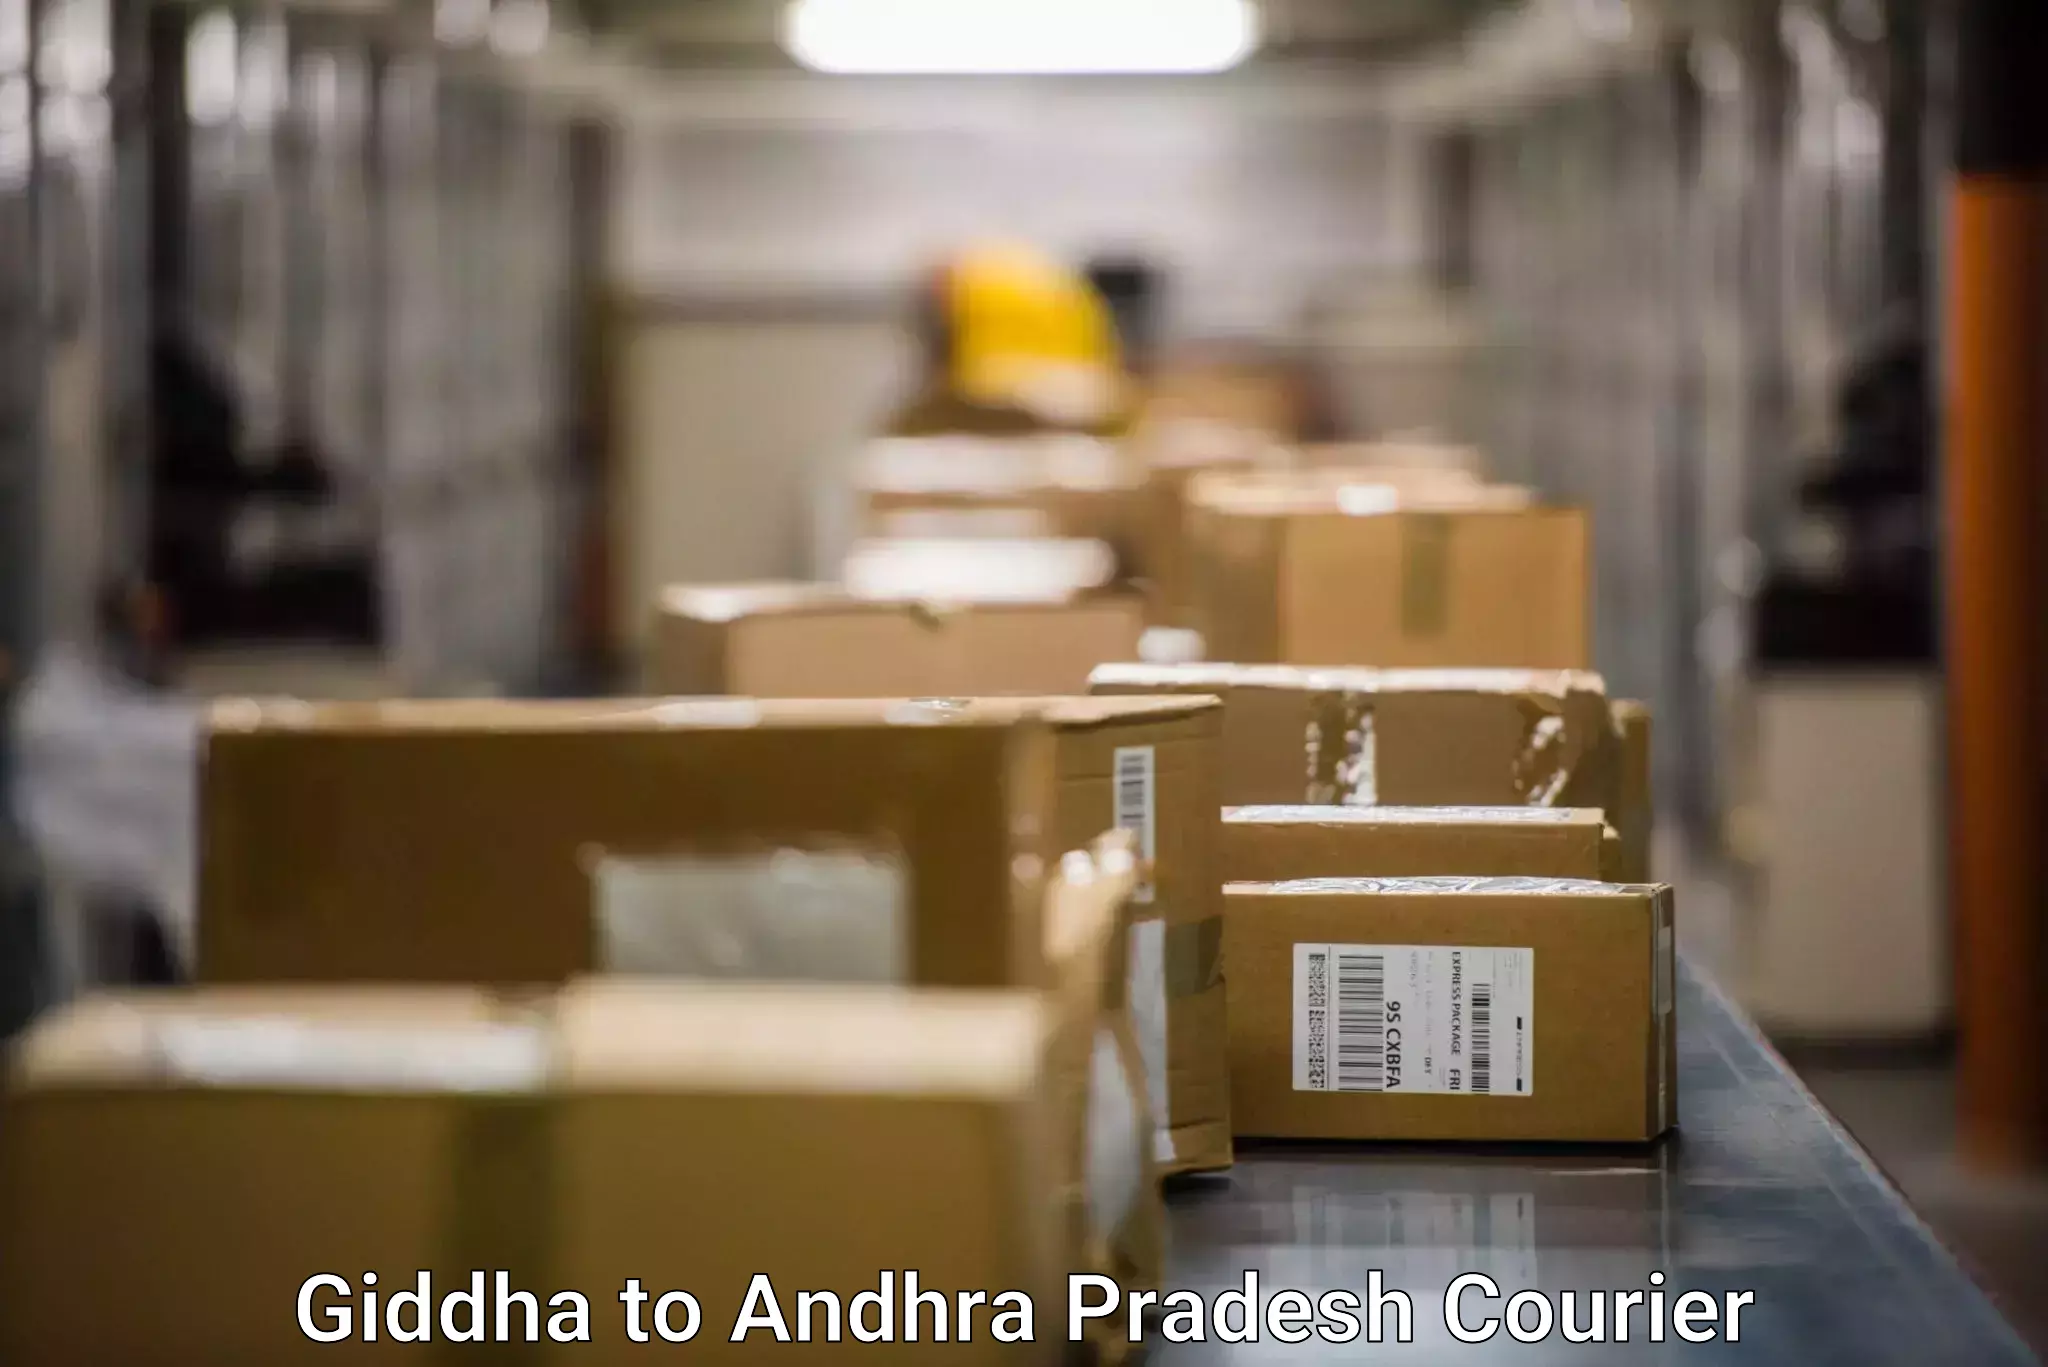 Courier service booking Giddha to Hindupur